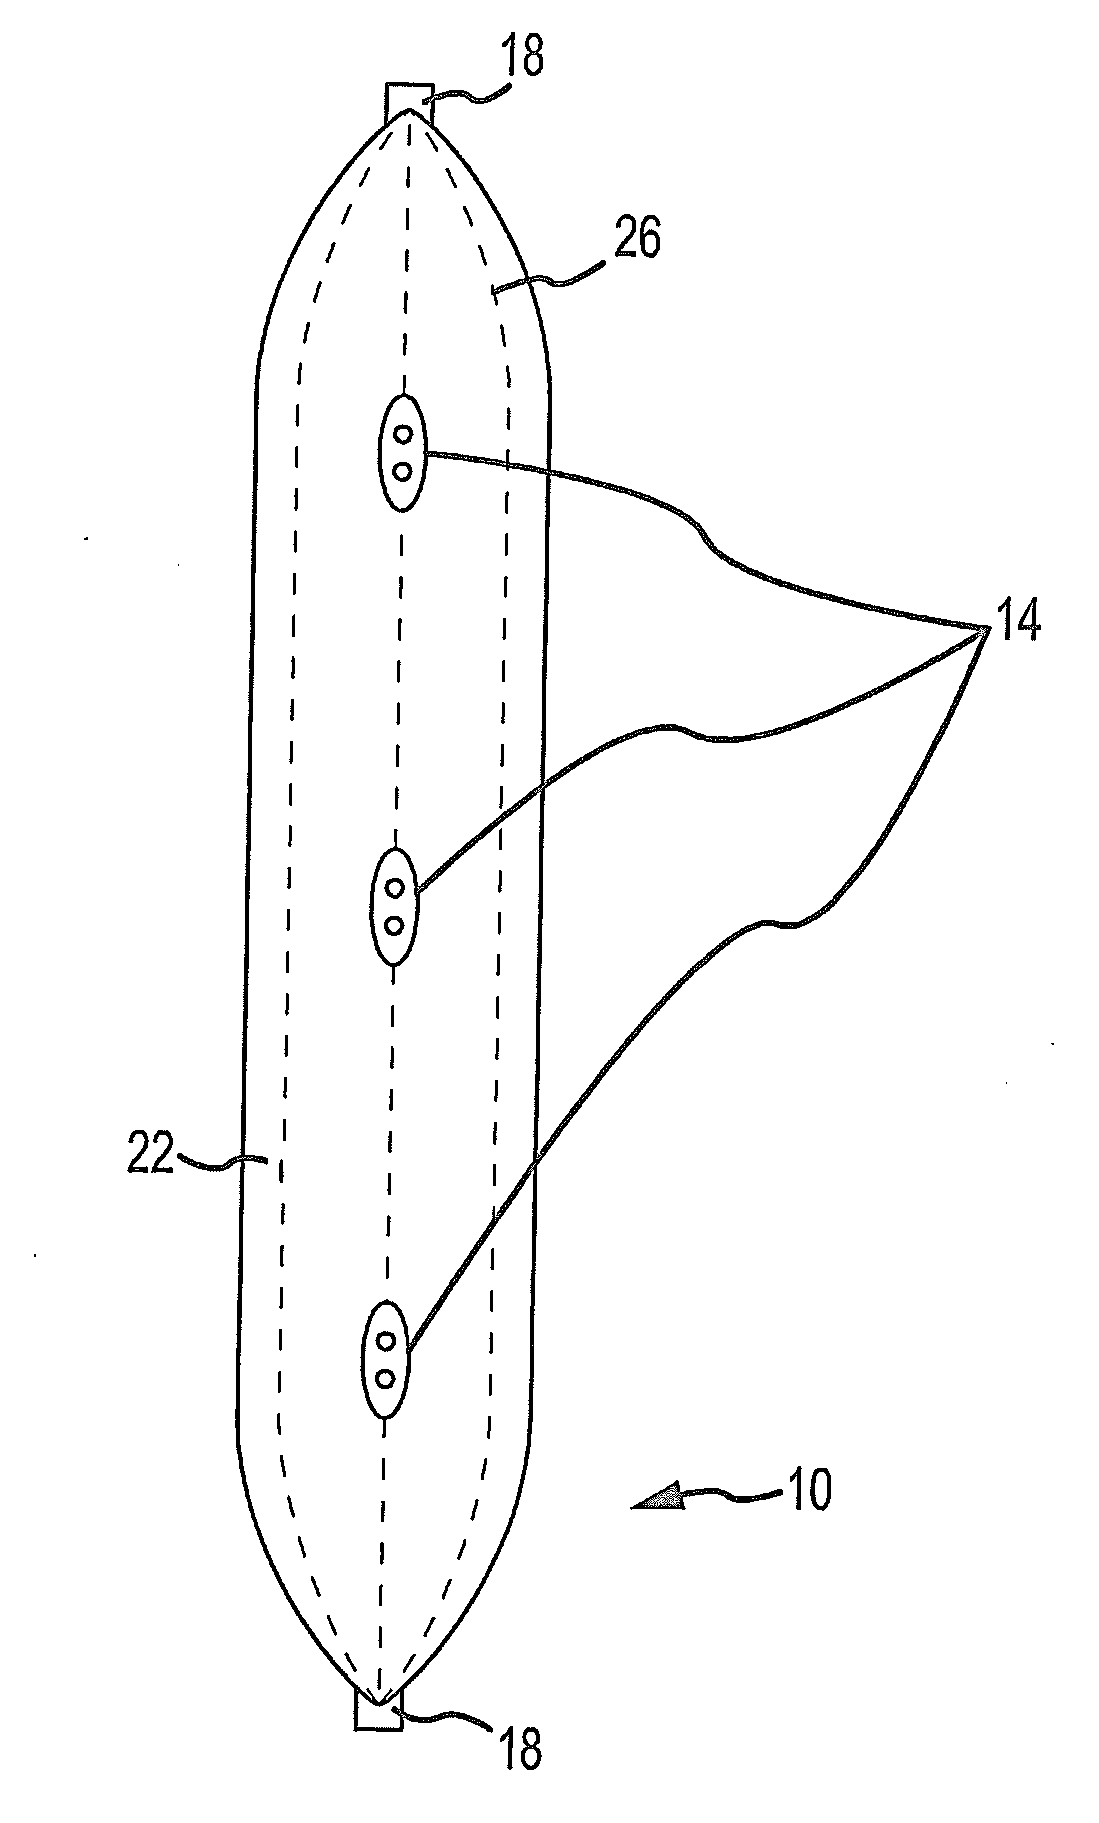 Method and System for a Towed Vessel Suitable for Transporting Liquids